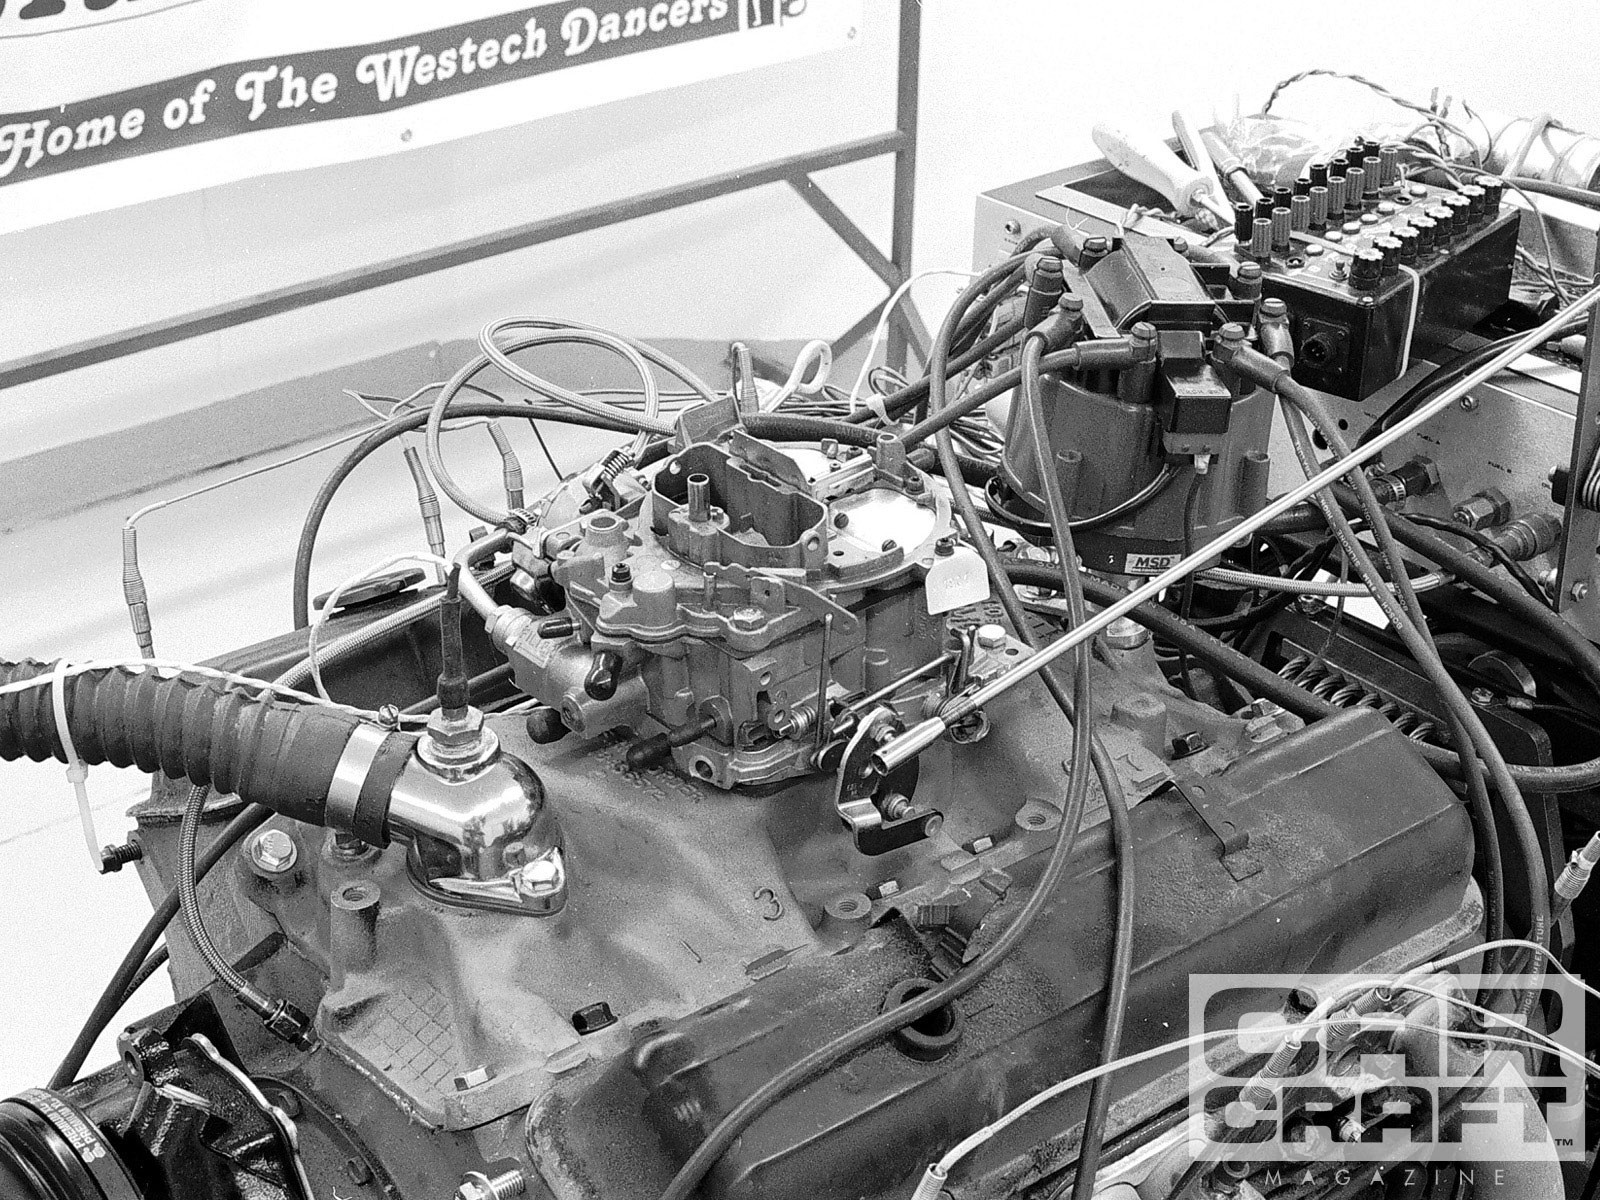 1985 Chevy 305 Engine Diagram 305 Chevy Small Block Engine Build Hot Rod Network Of 1985 Chevy 305 Engine Diagram